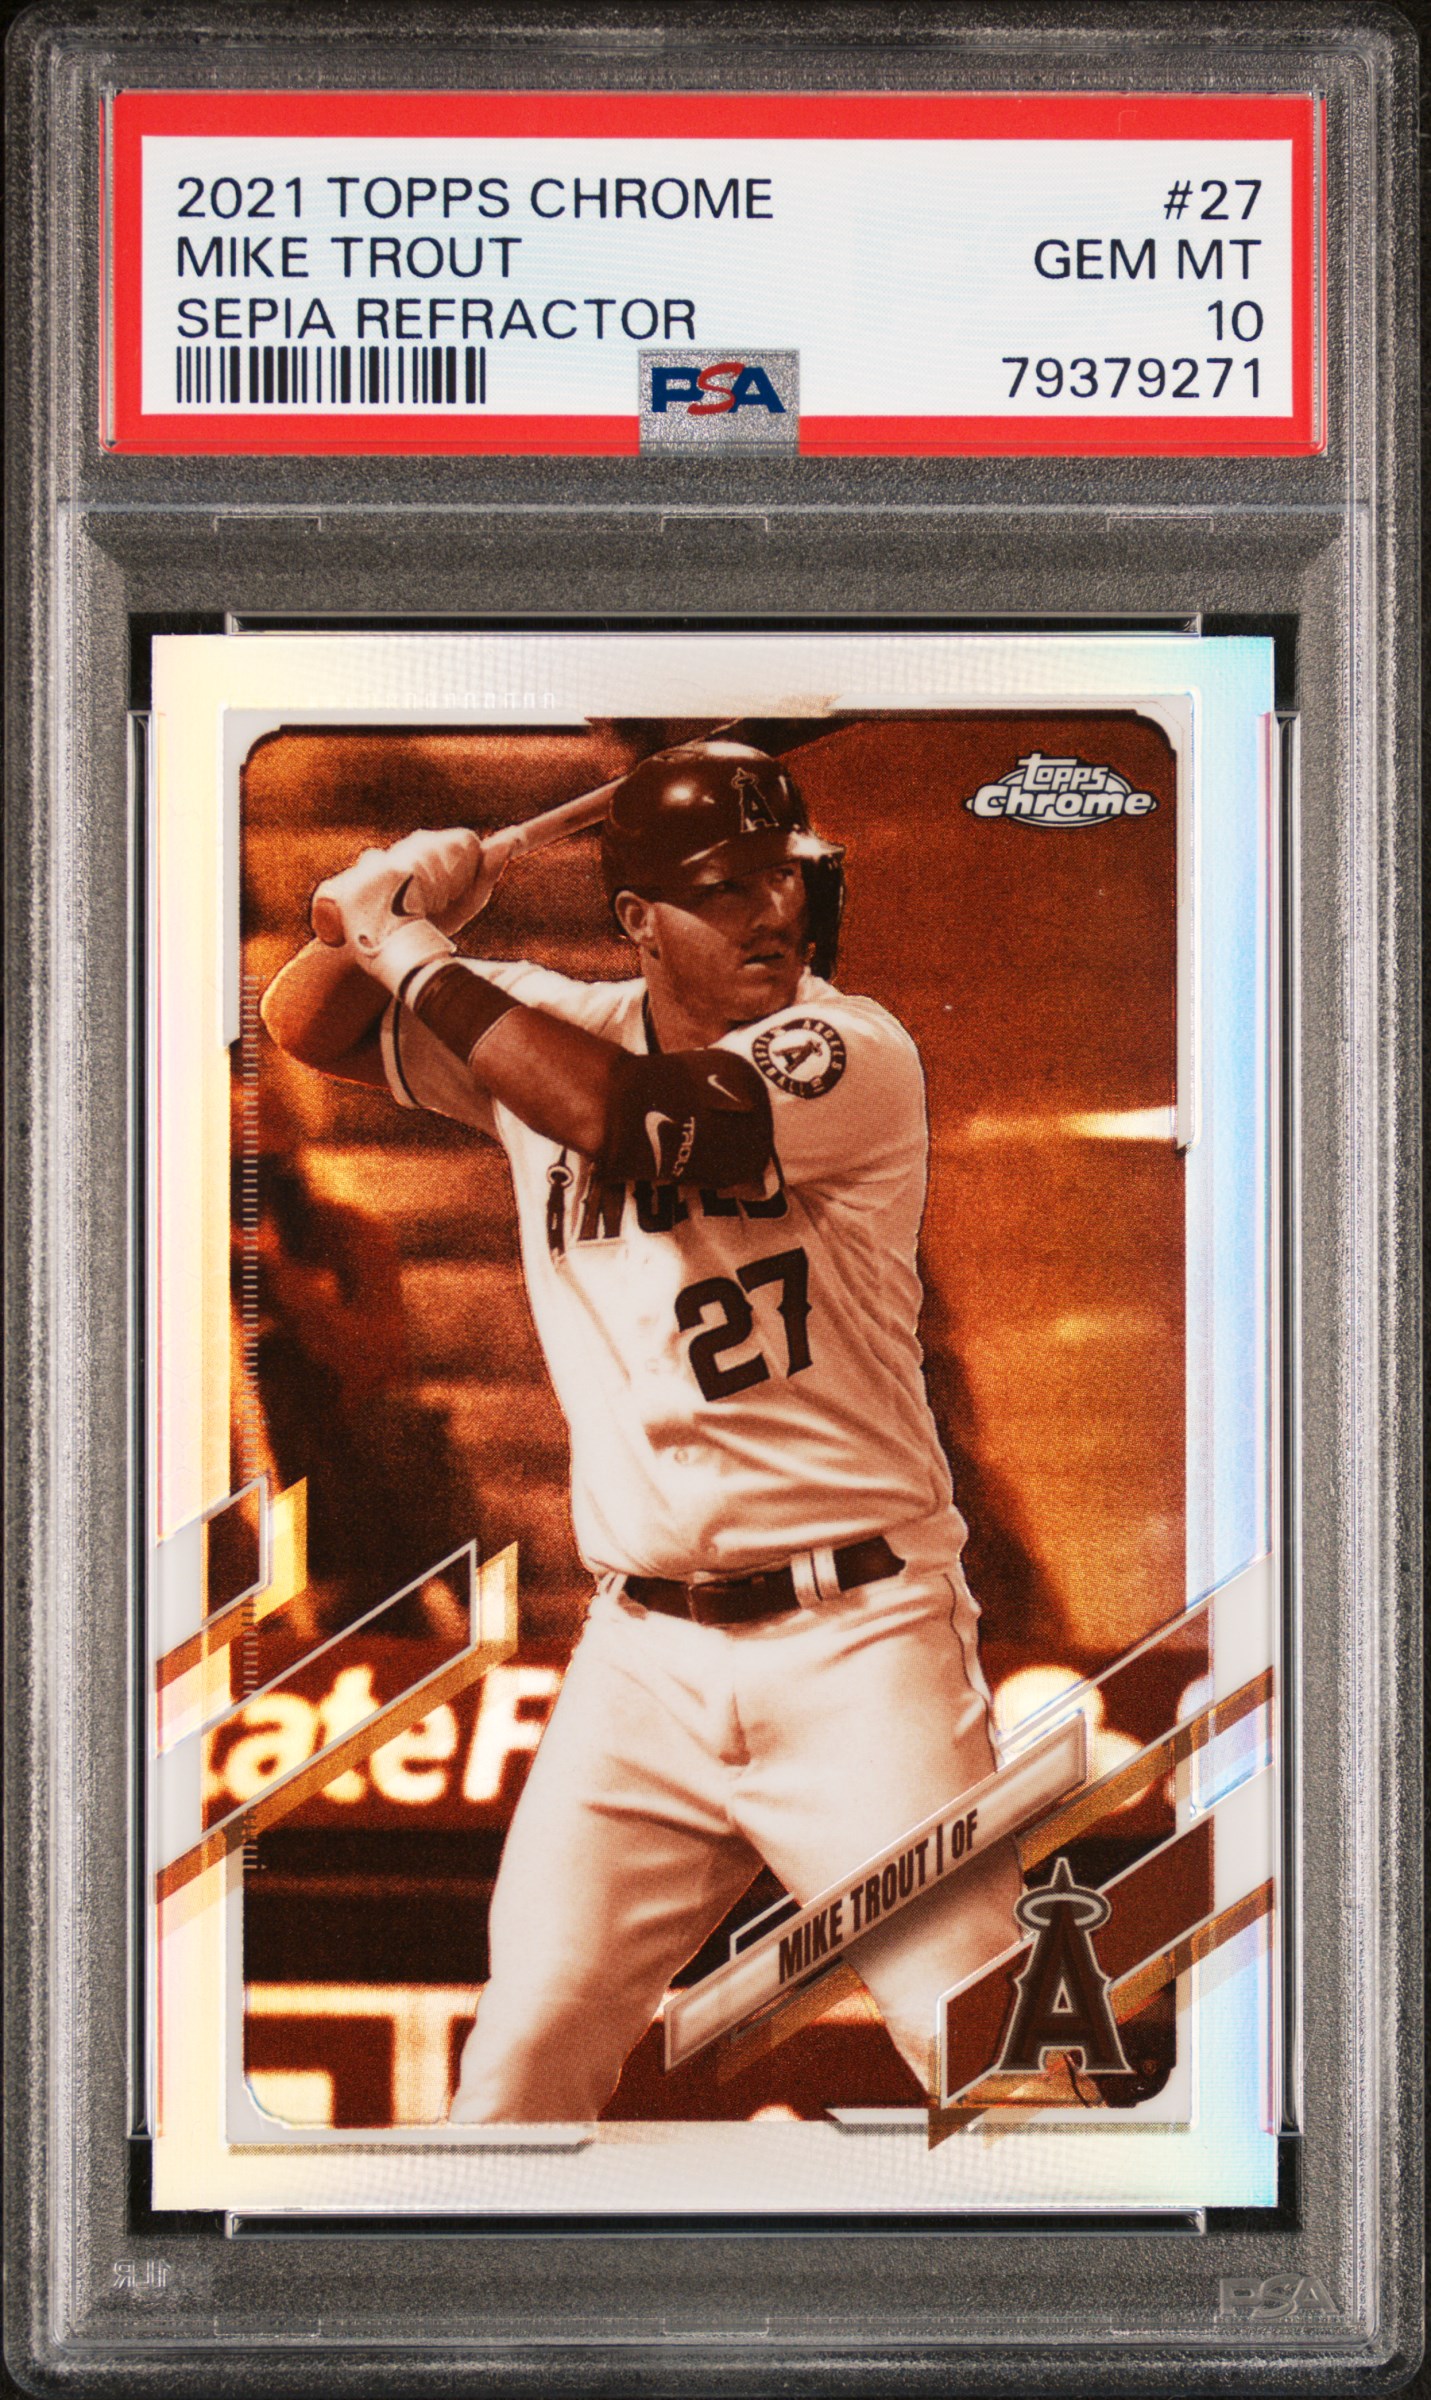 2021 Topps Chrome Sepia Refractor #27 Mike Trout – PSA GEM MT 10